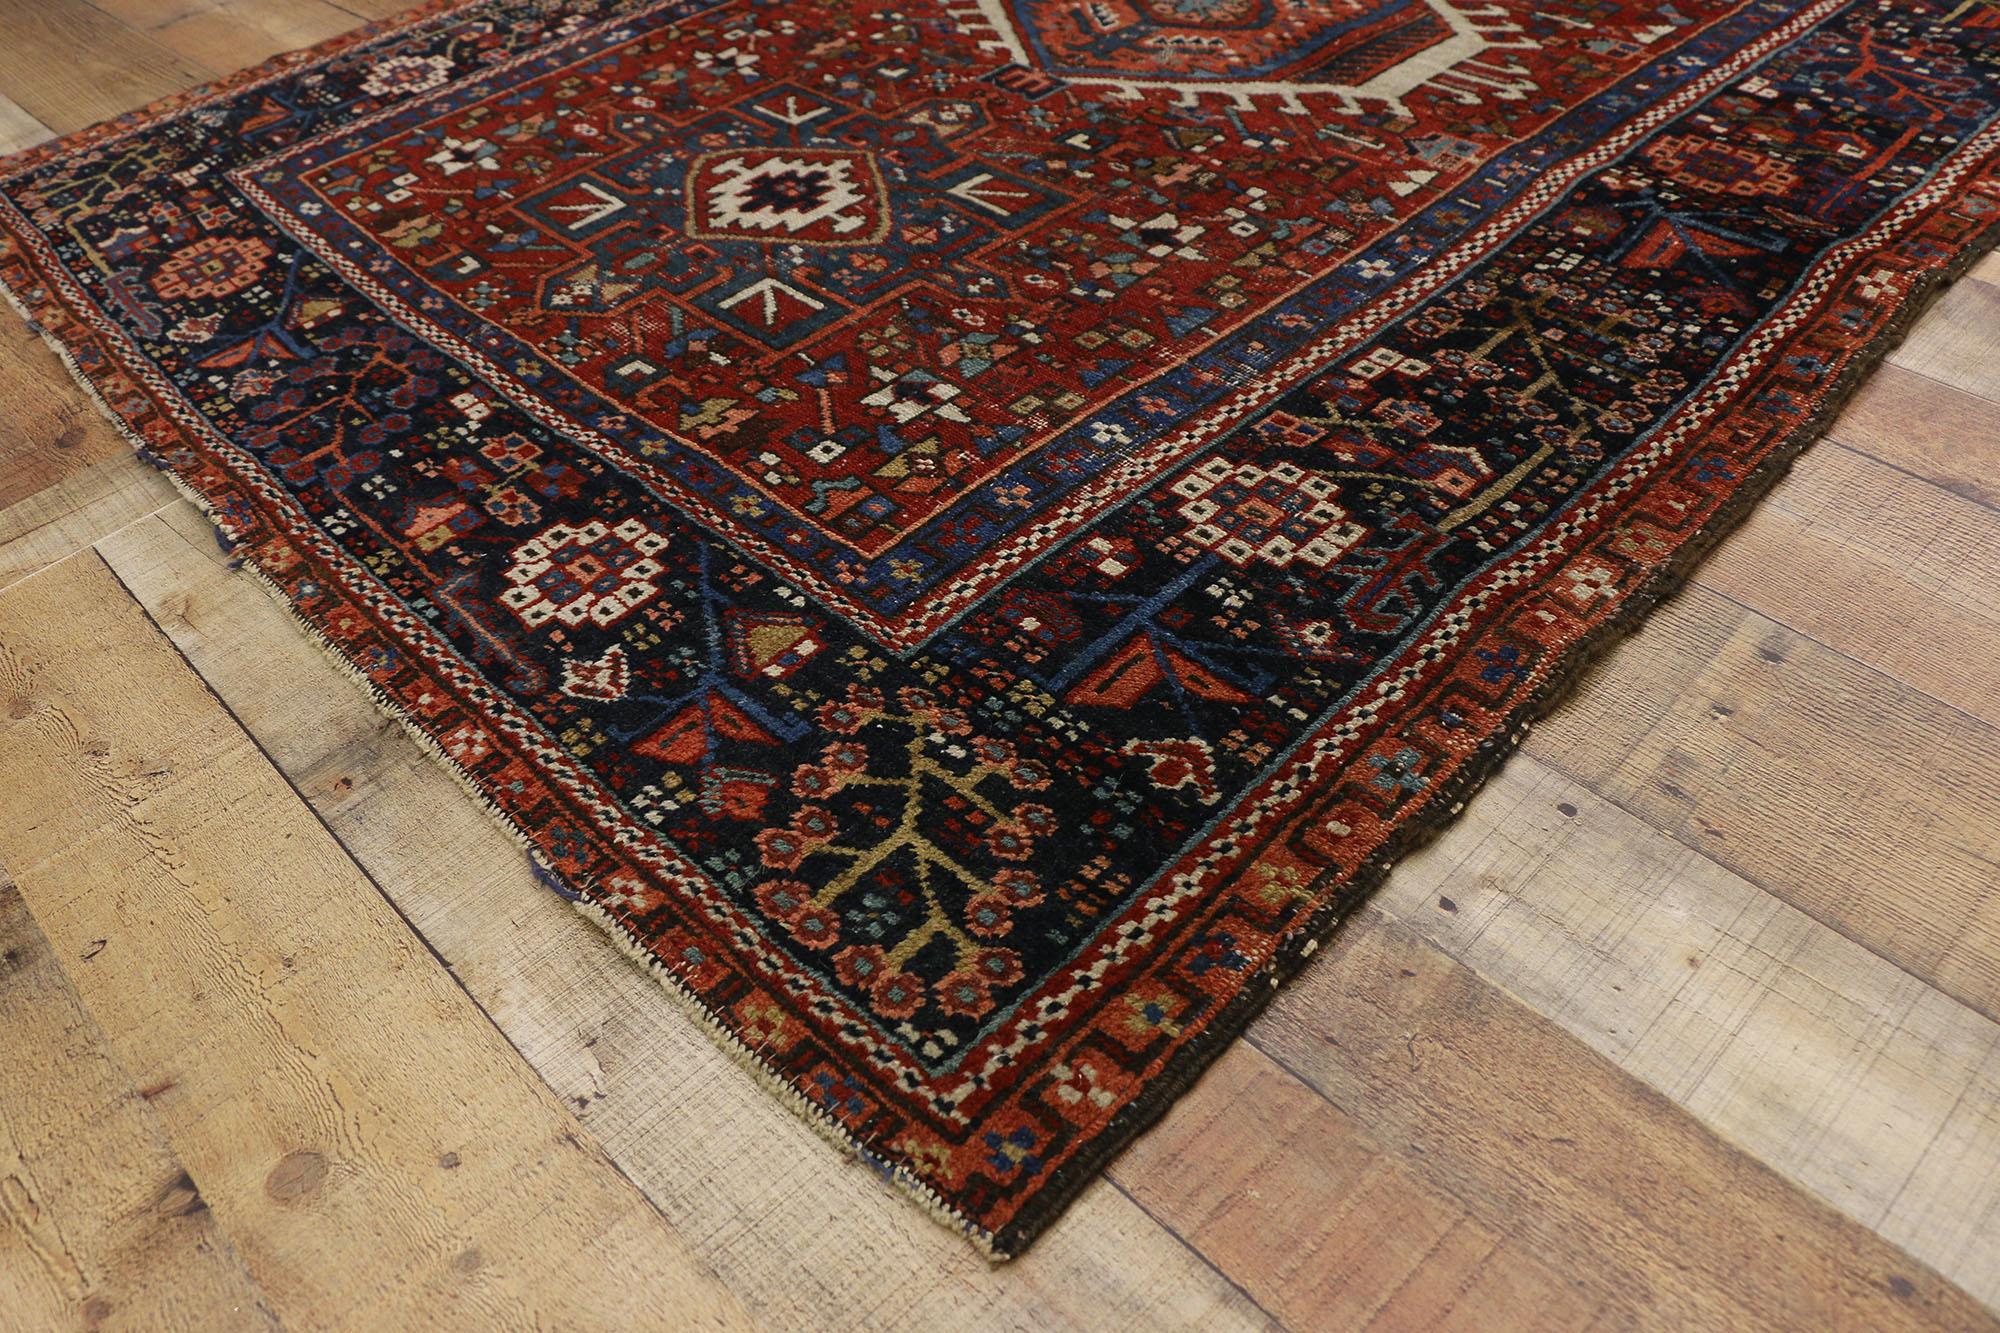 Antique Persian Heriz Rug with Tribal Style, Study or Home Office Rug In Good Condition For Sale In Dallas, TX